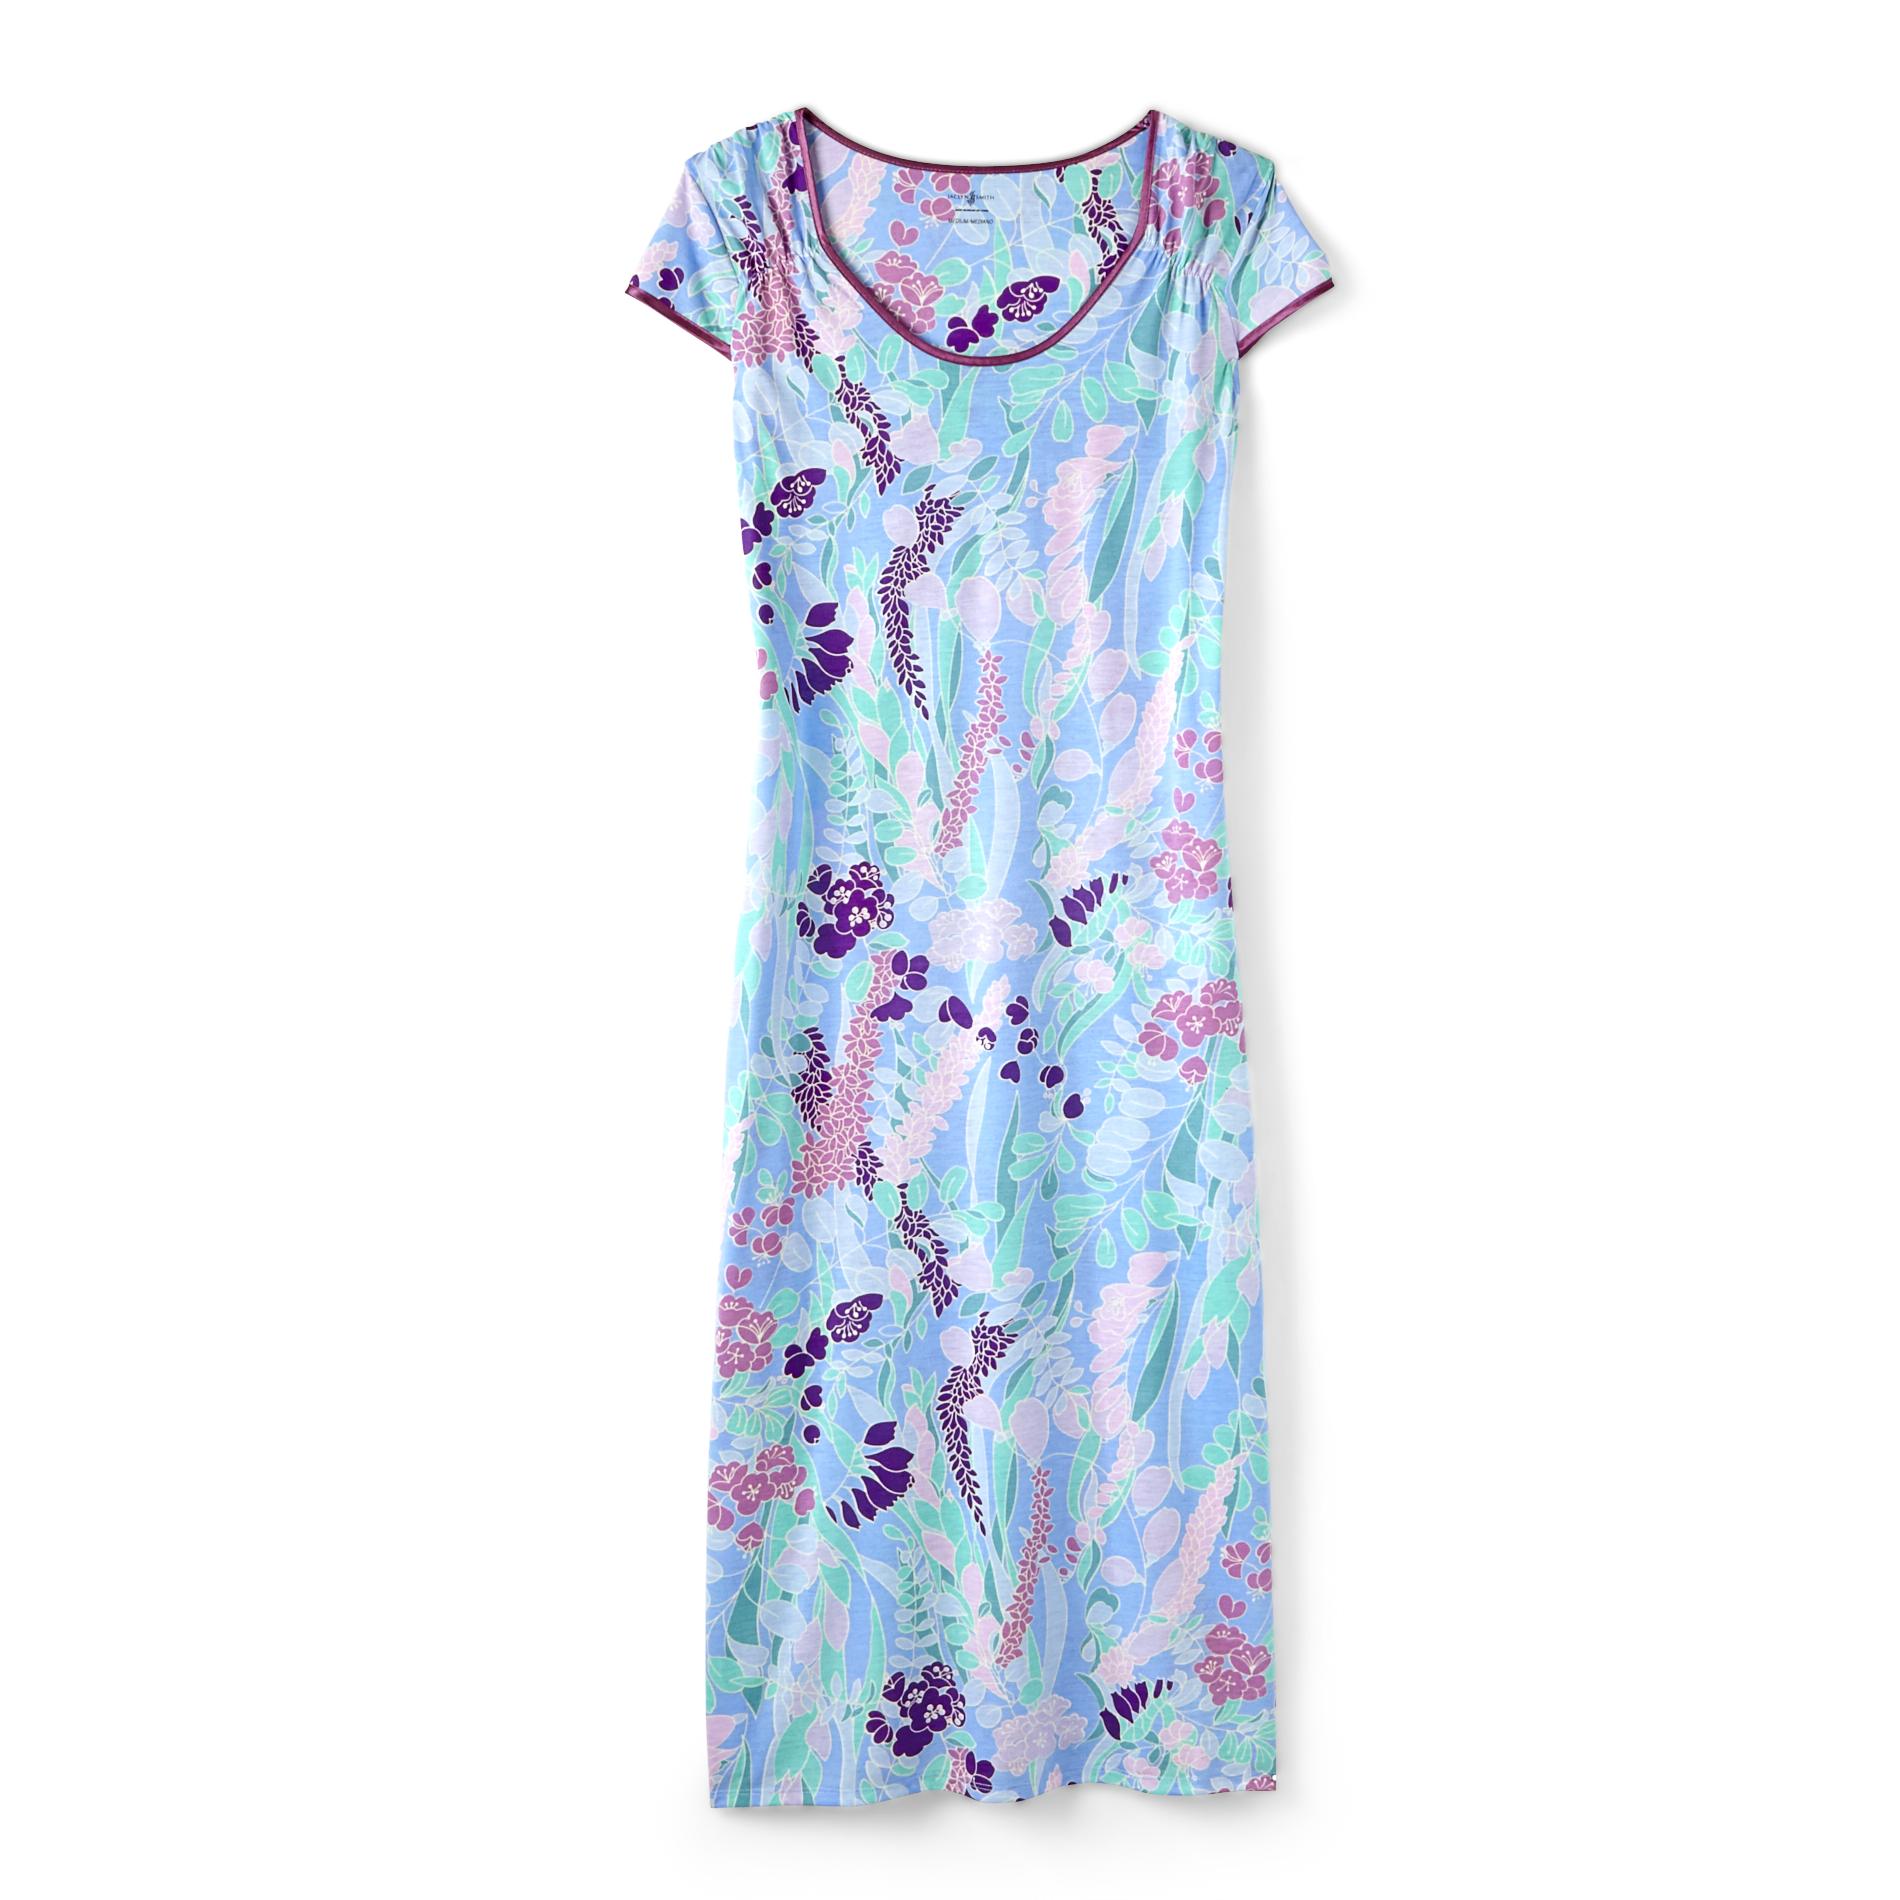 Jaclyn Smith Women's Short-Sleeve Maxi Nightgown - Floral